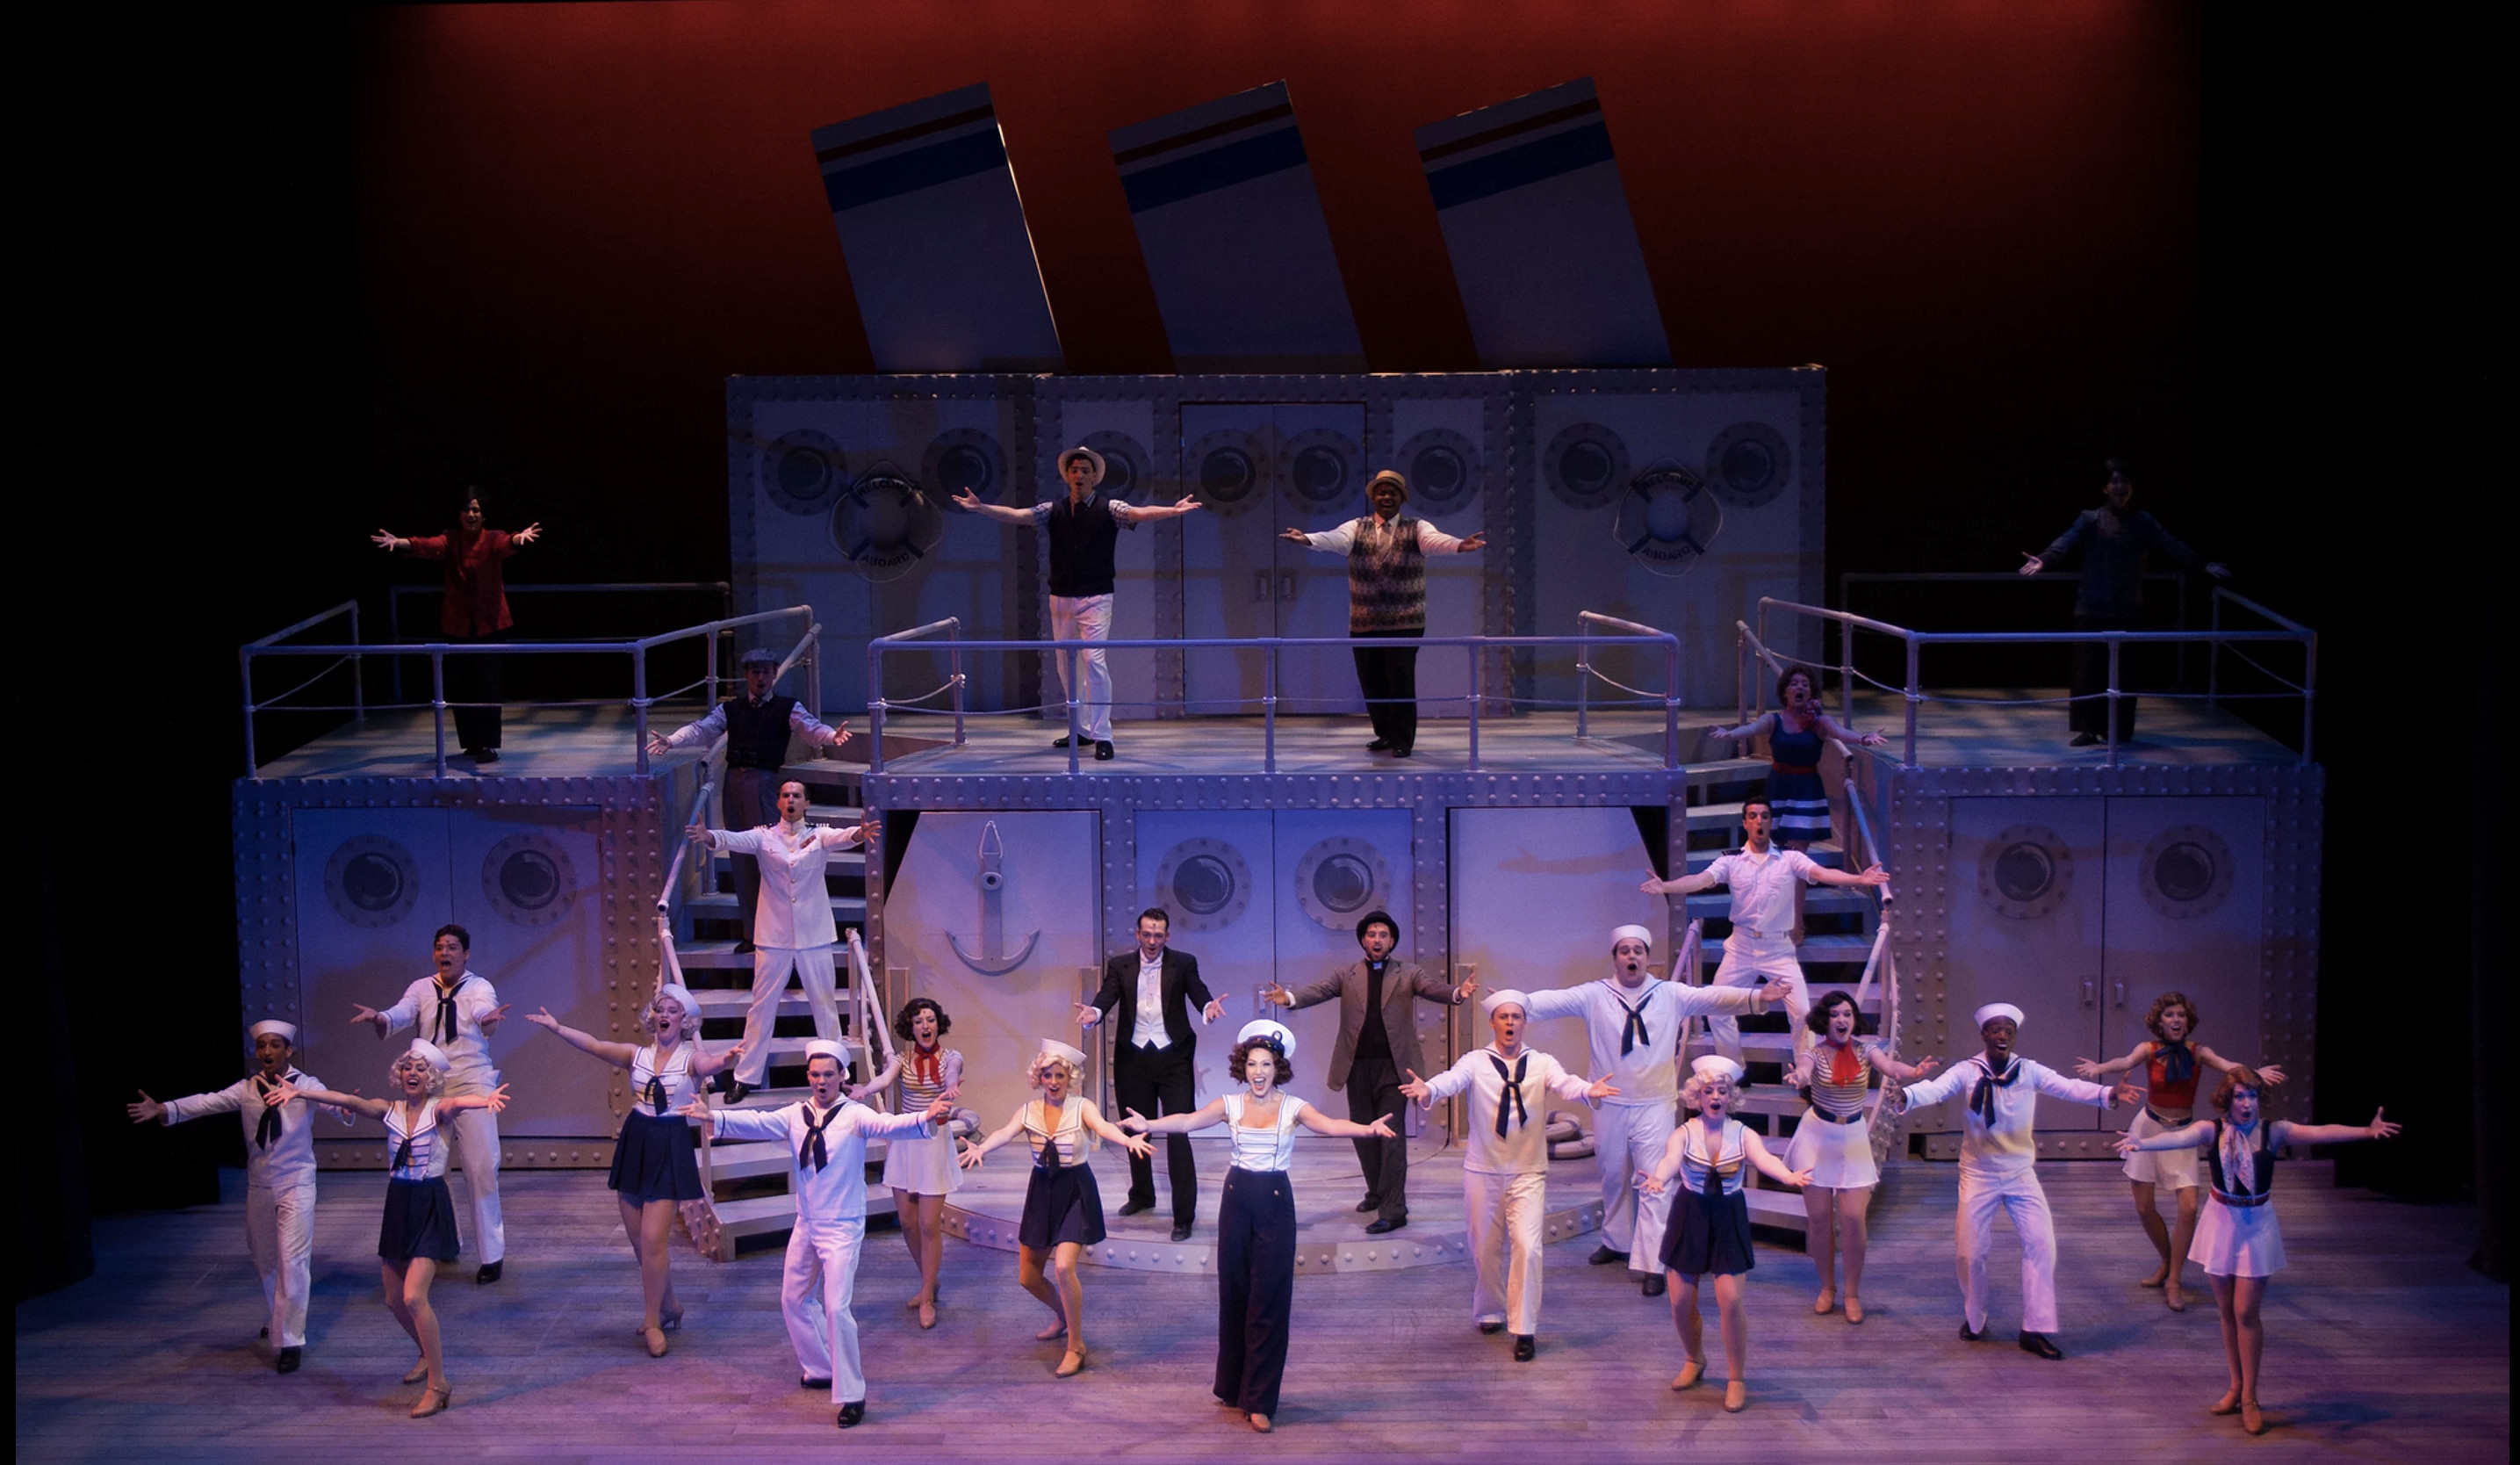 Full cast in sailor outfits on the cruise boat, striking a pose with their arms out. 